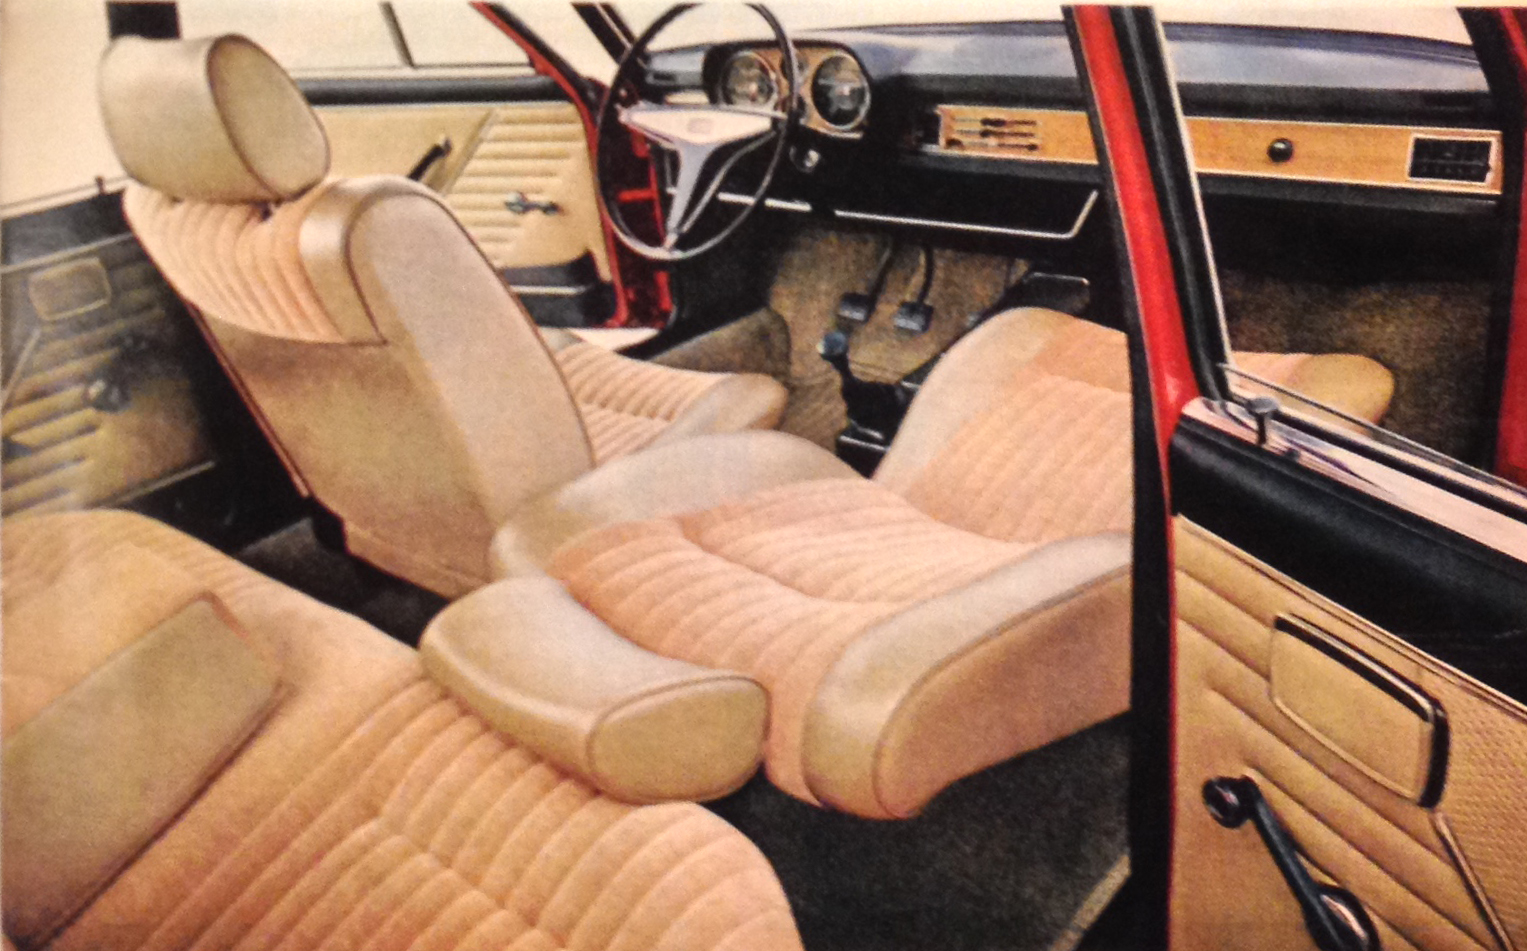 Audi Advertising - 29 May 1970 LIFE Magazine pages 16 and 17 - Audi's orthopedic seats - photo